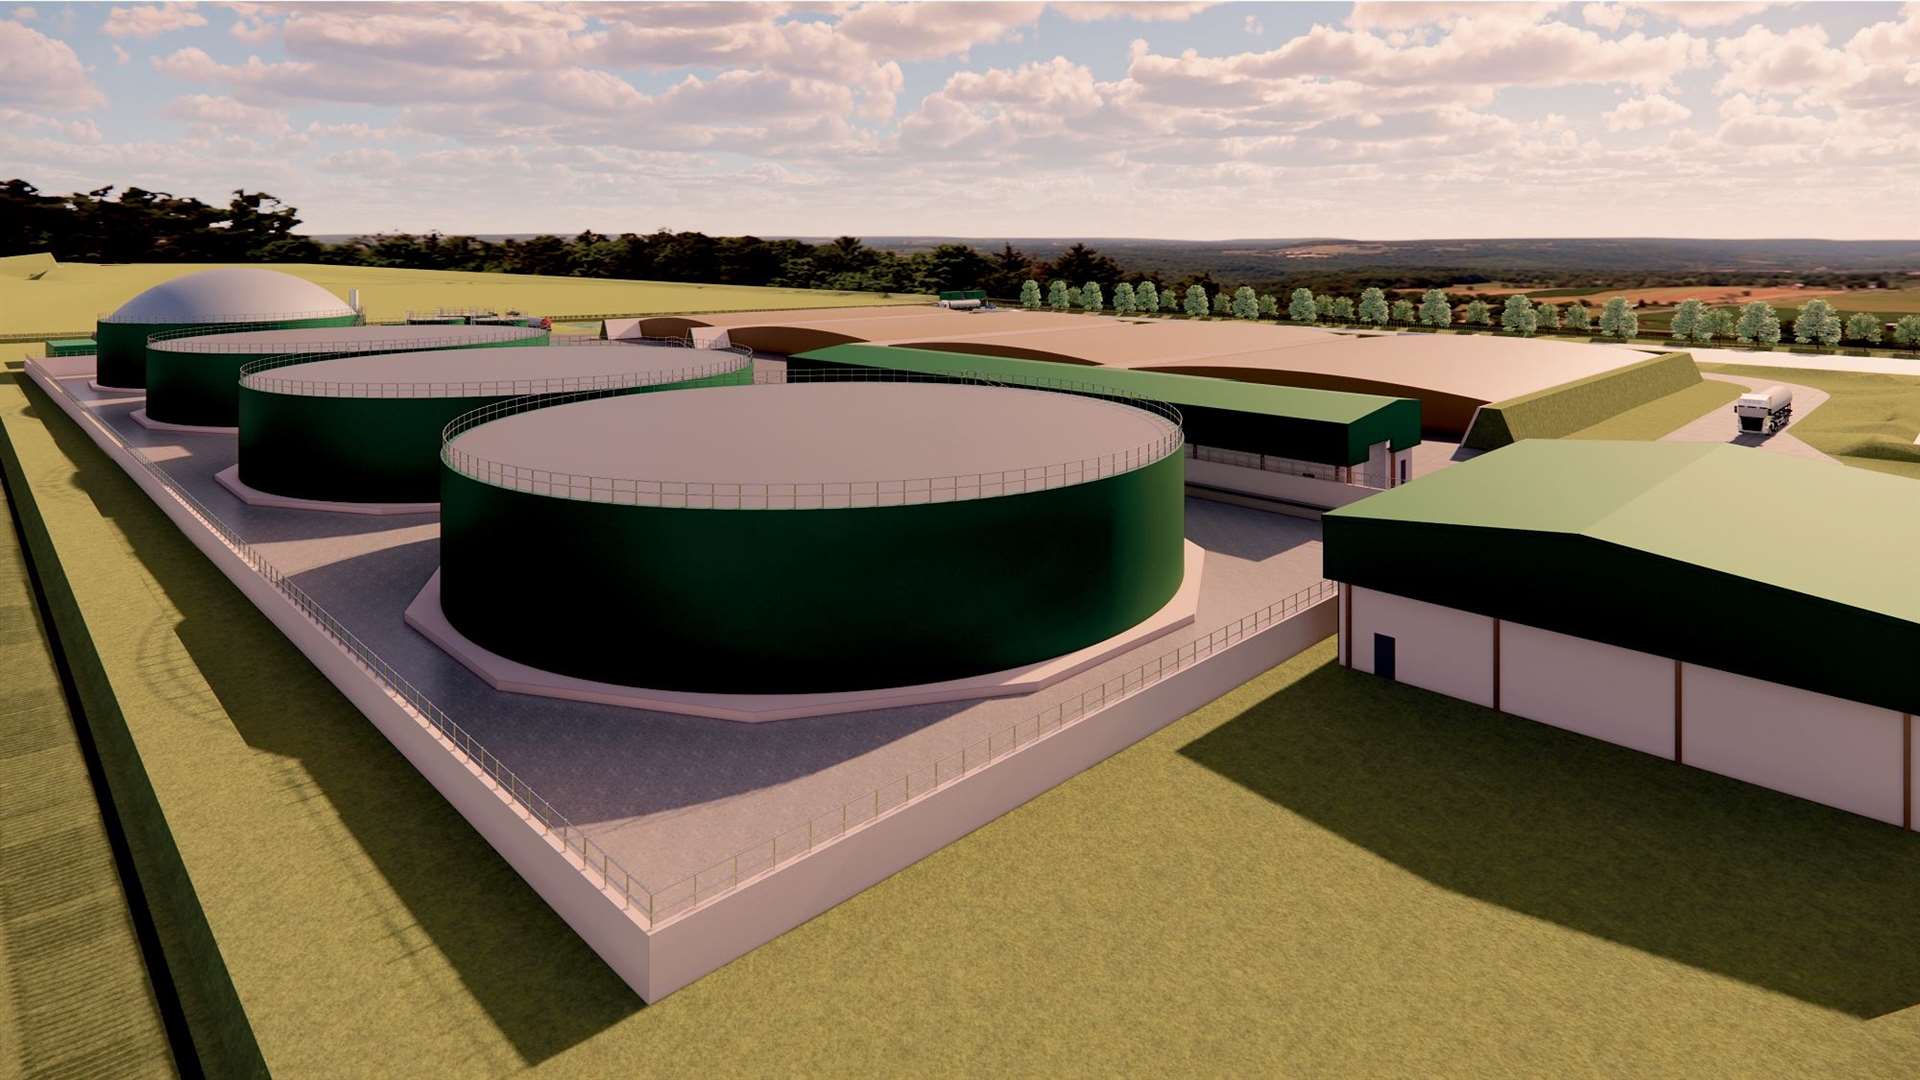 Artist's impression of Acorn Energy's Anaerobic Digestion plant for Green energy at Fearn.